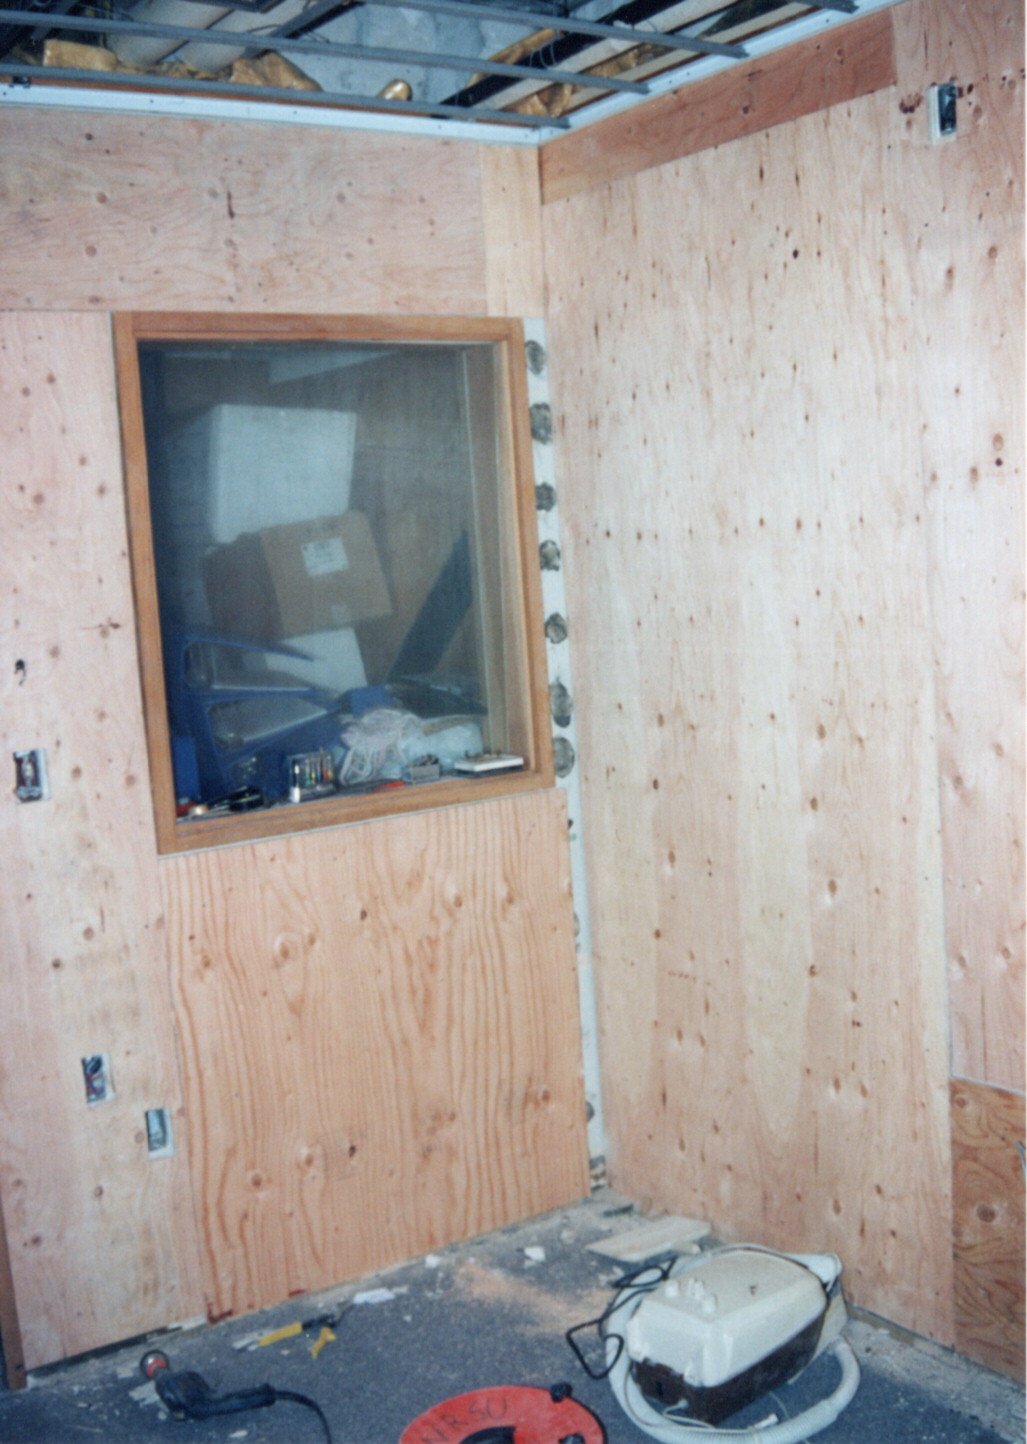 1995 - Studio B Rebuild - Looking at Announce Booth 2